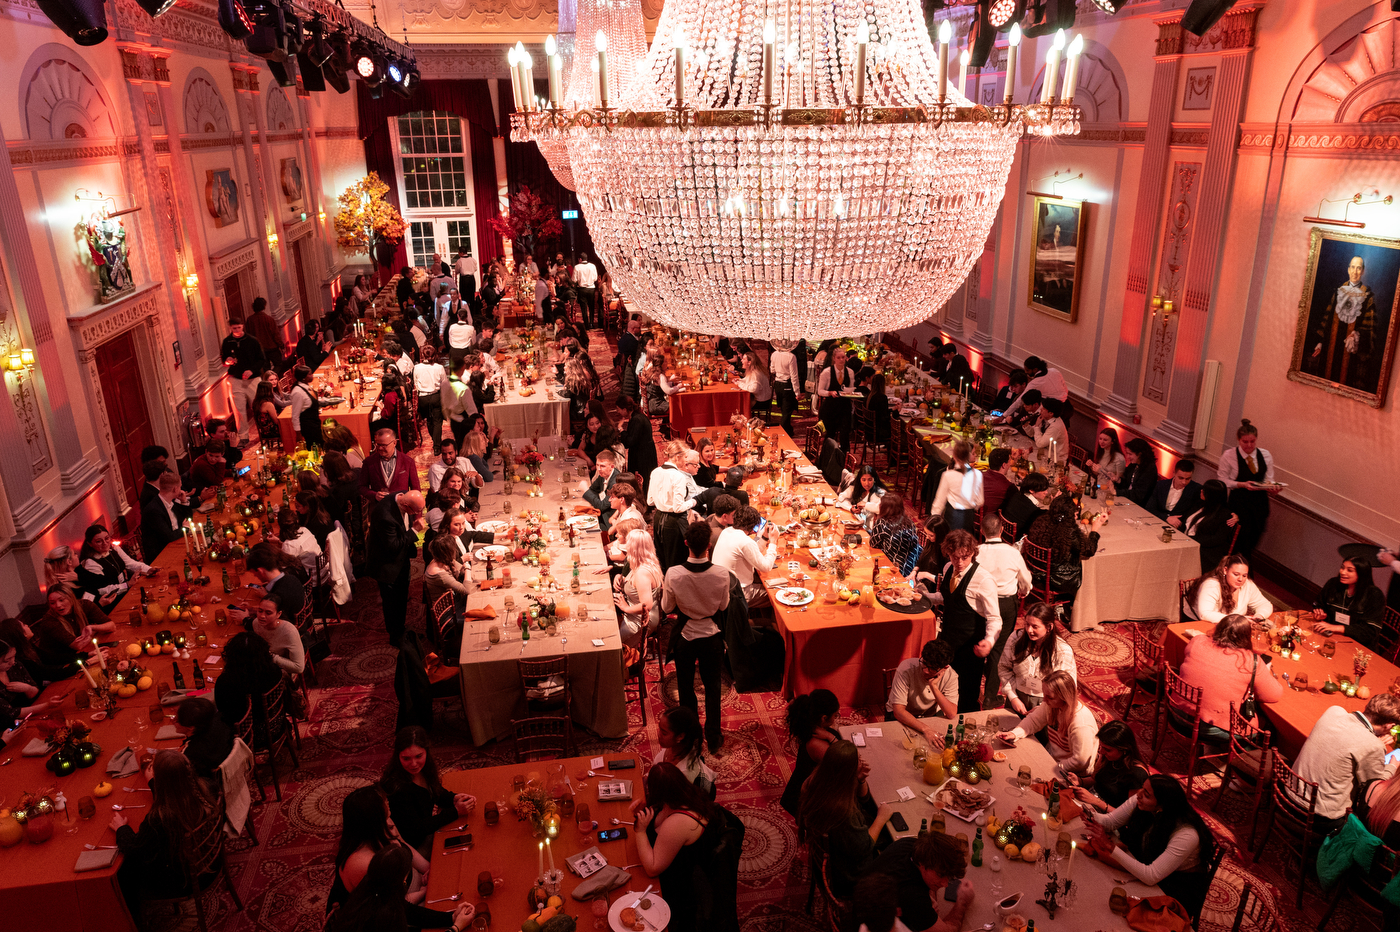 A large crowd sits together in a ballroom to celebrate Thanksgiving.